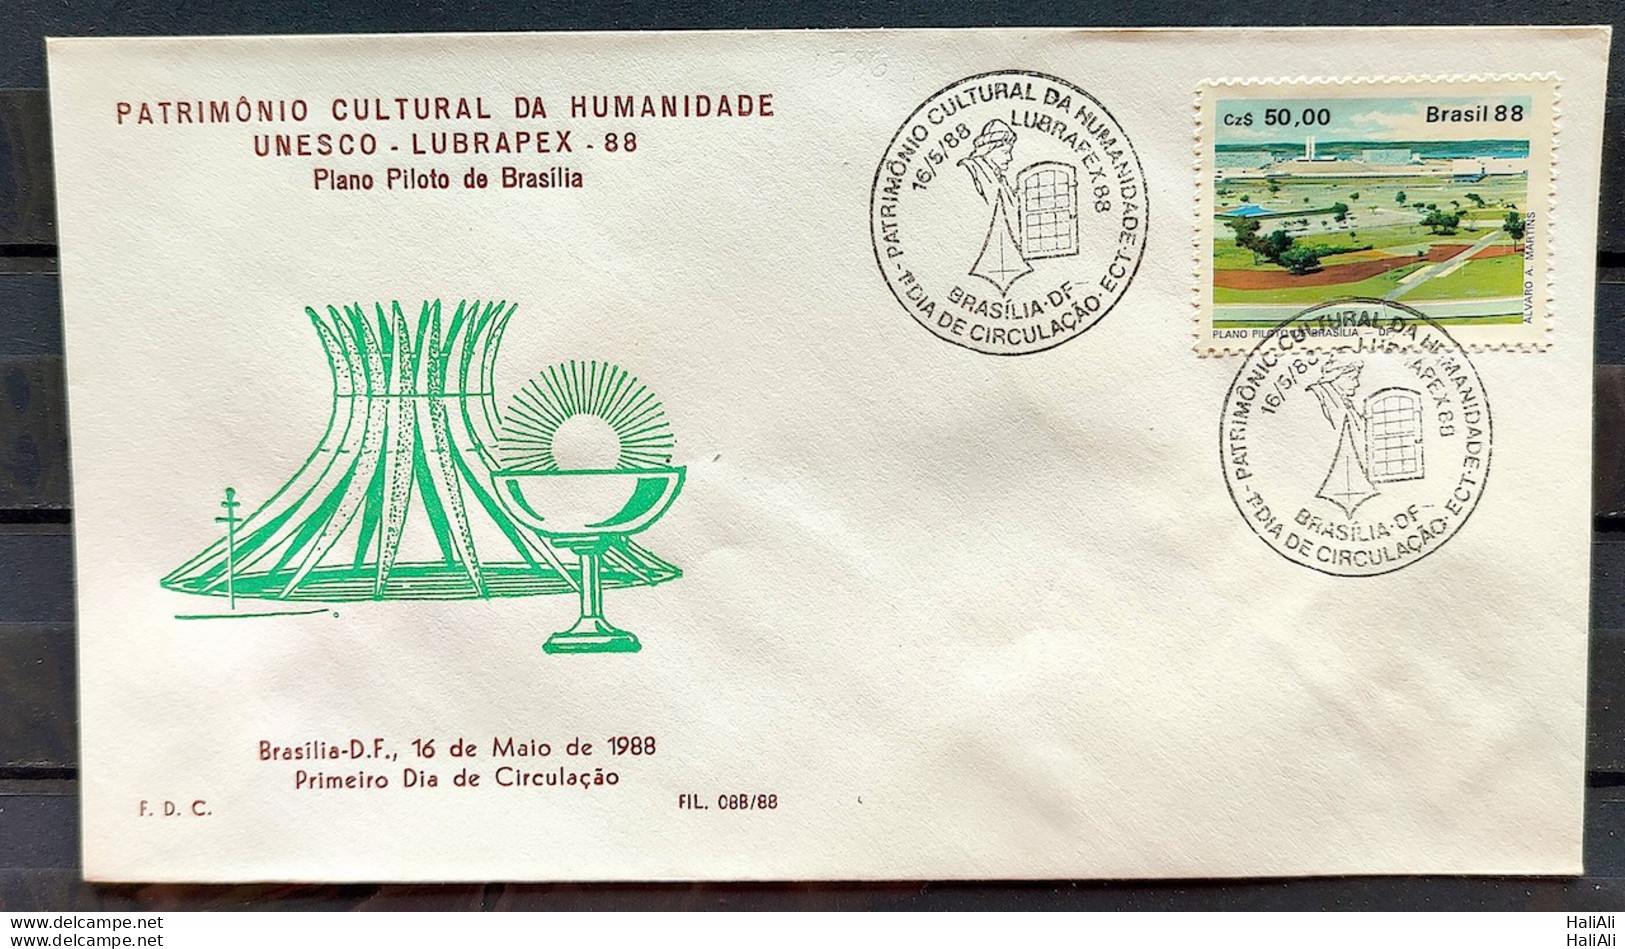 Brazil Envelope PVT FIL 08B 1988 Cultural Heritage Of Humanity CBC DF - FDC